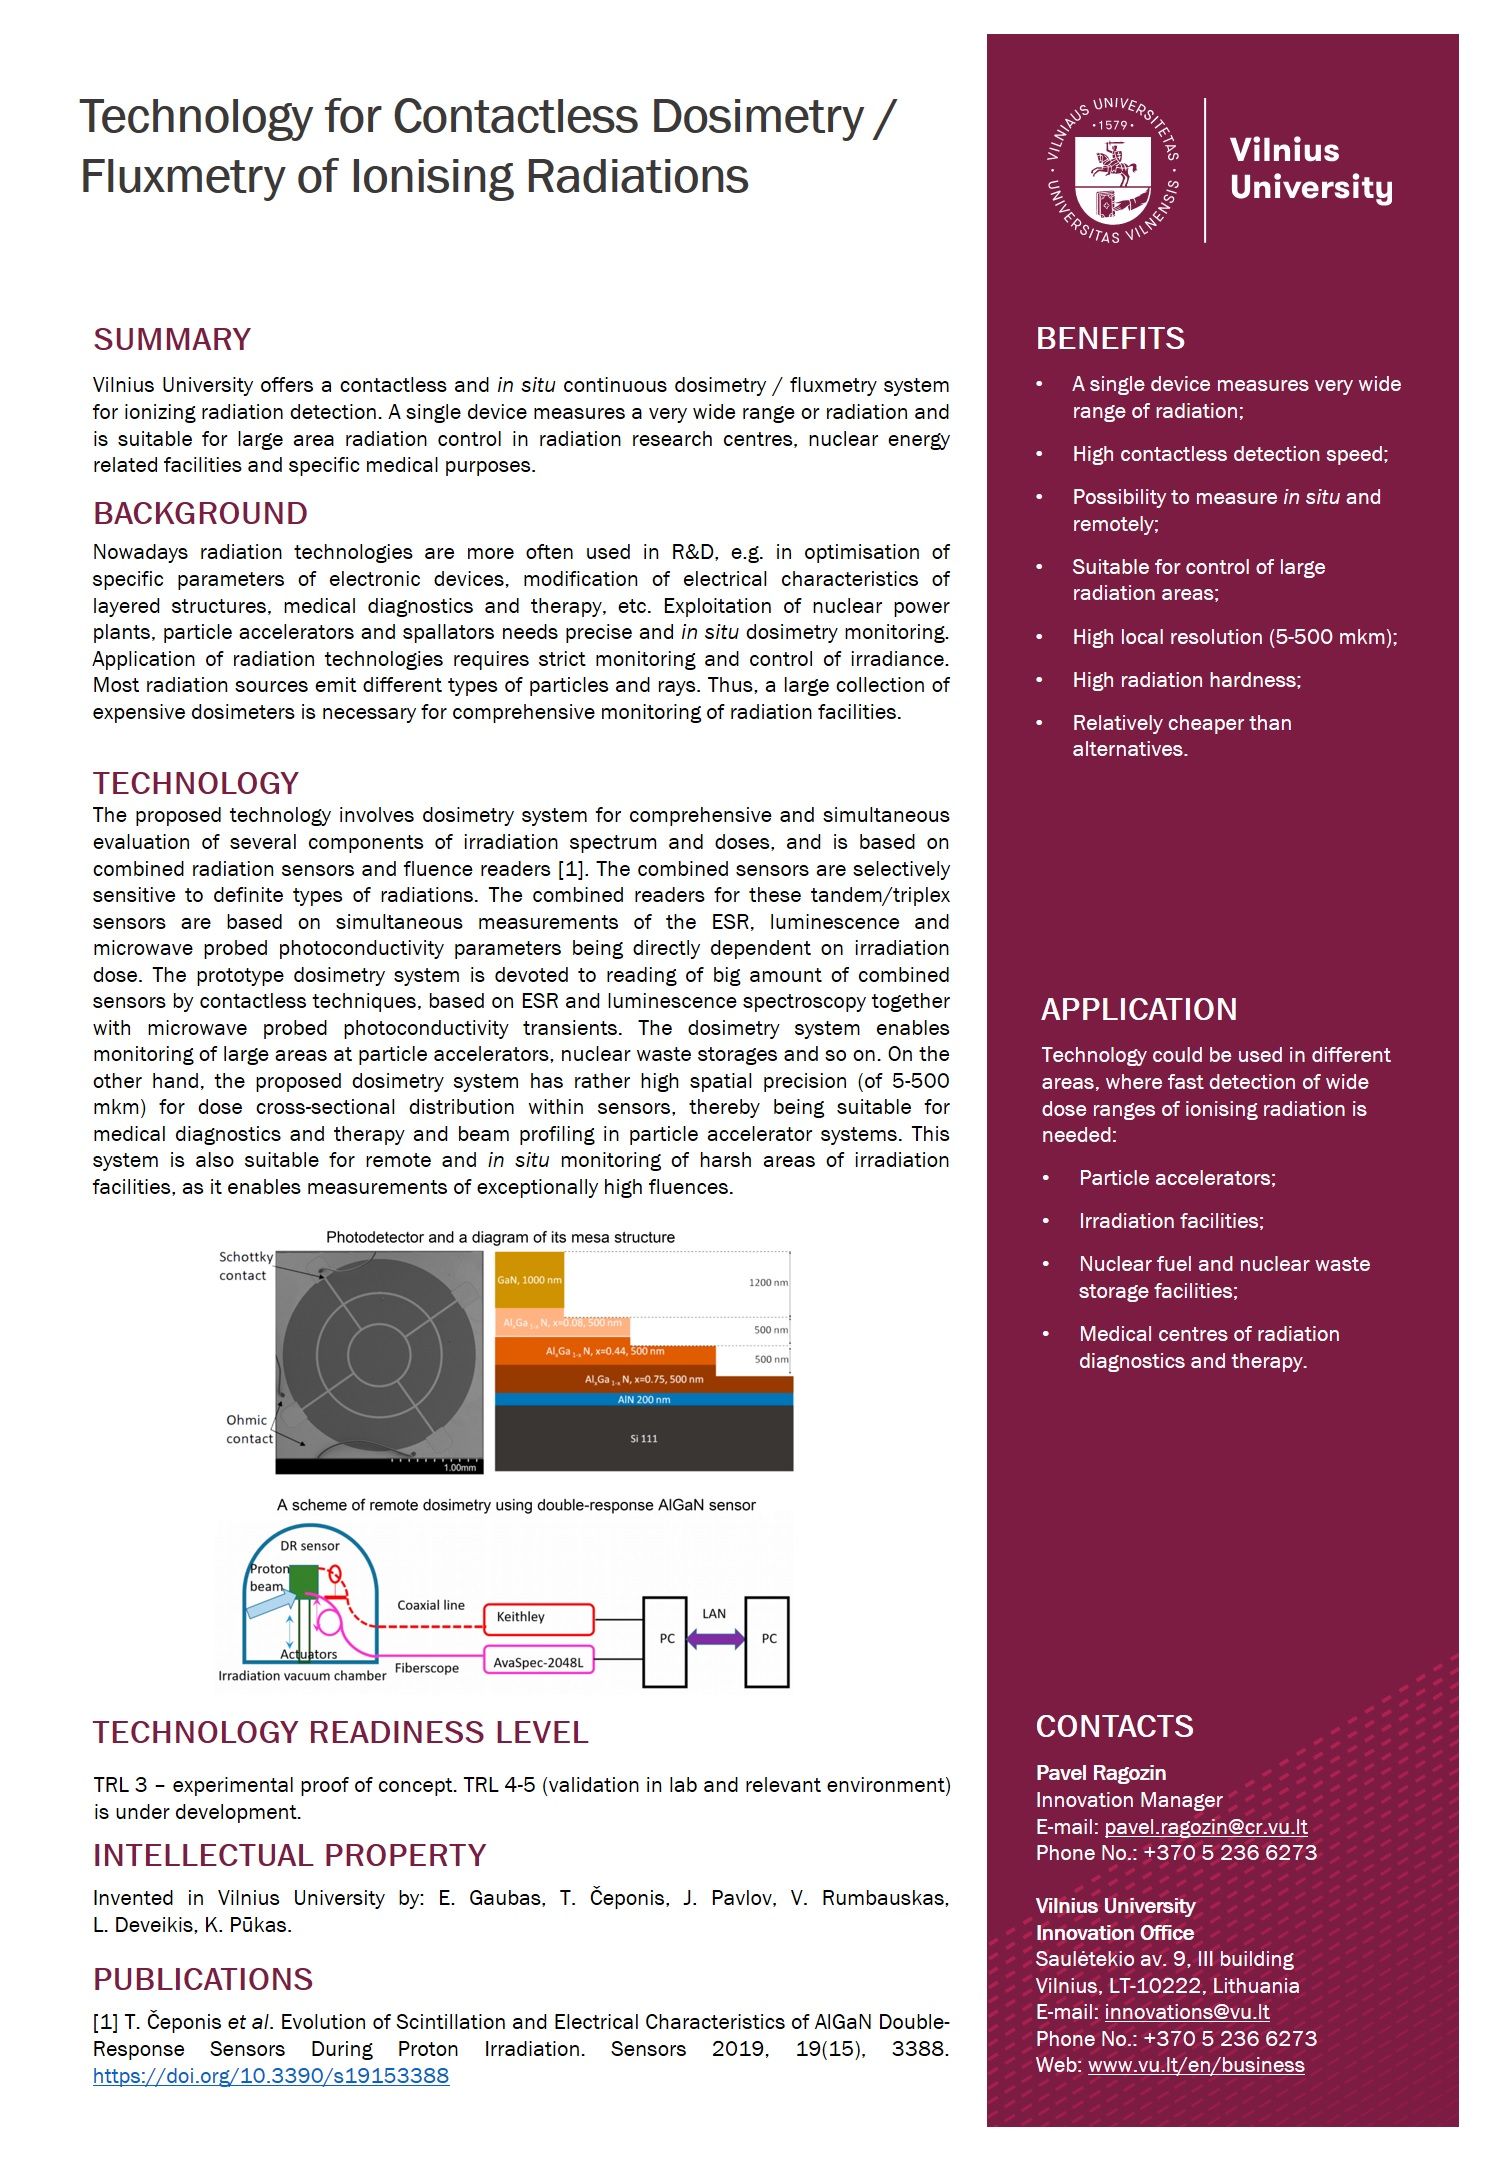 Onepager Technology for Contactless Dosimetry Fluxmetry of Ionising Radiations